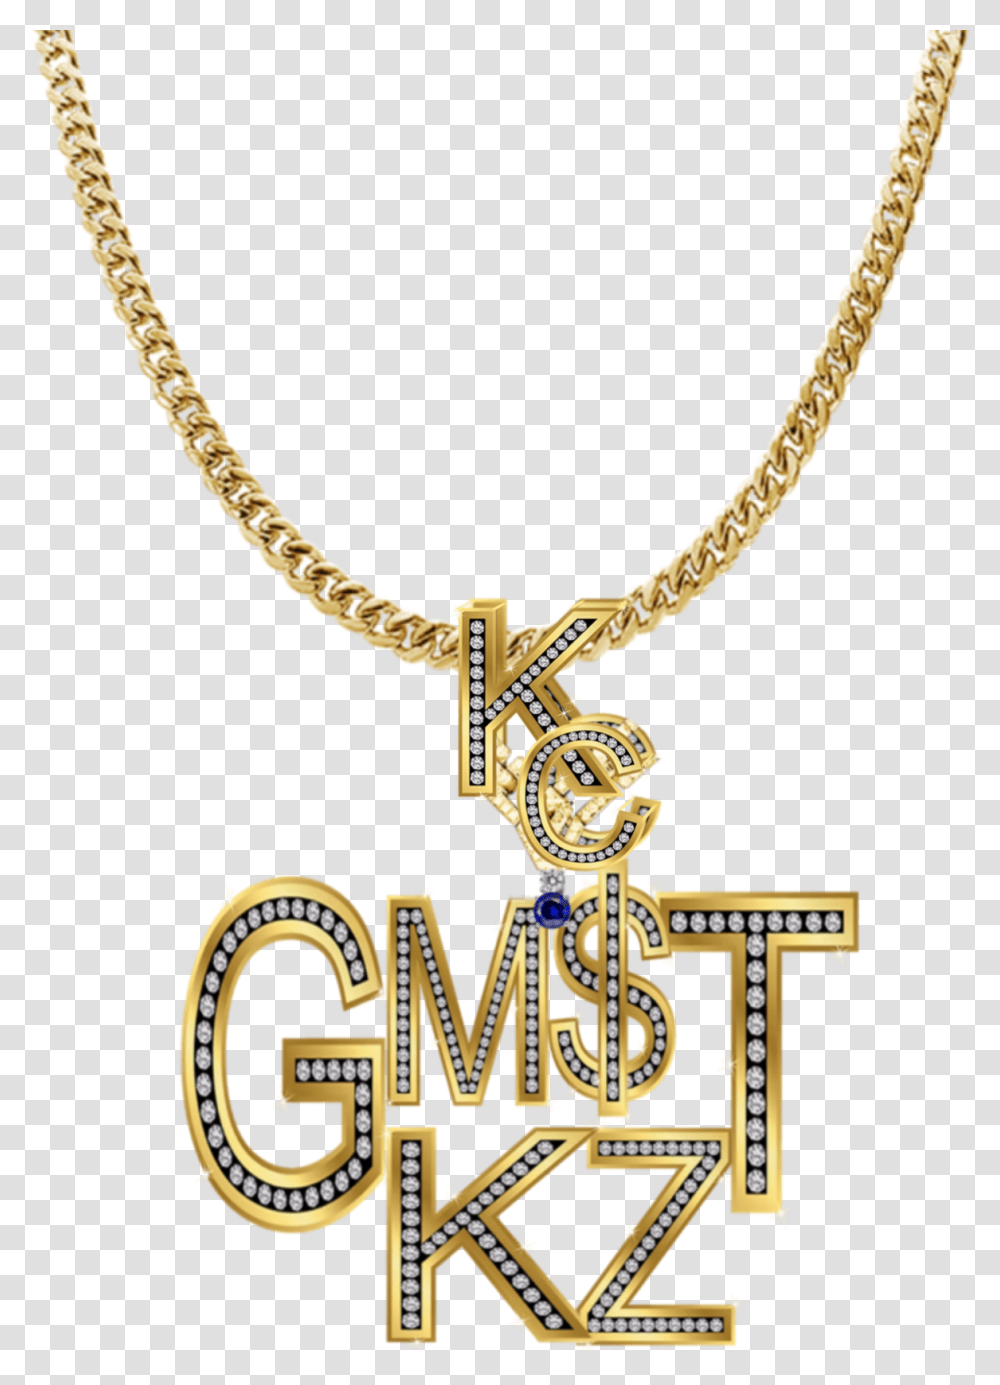 Jewelry Rapper Trapper Trap Gold Diamond Necklace Anjali Cutting Mangalya Chain, Accessories, Accessory, Pendant Transparent Png